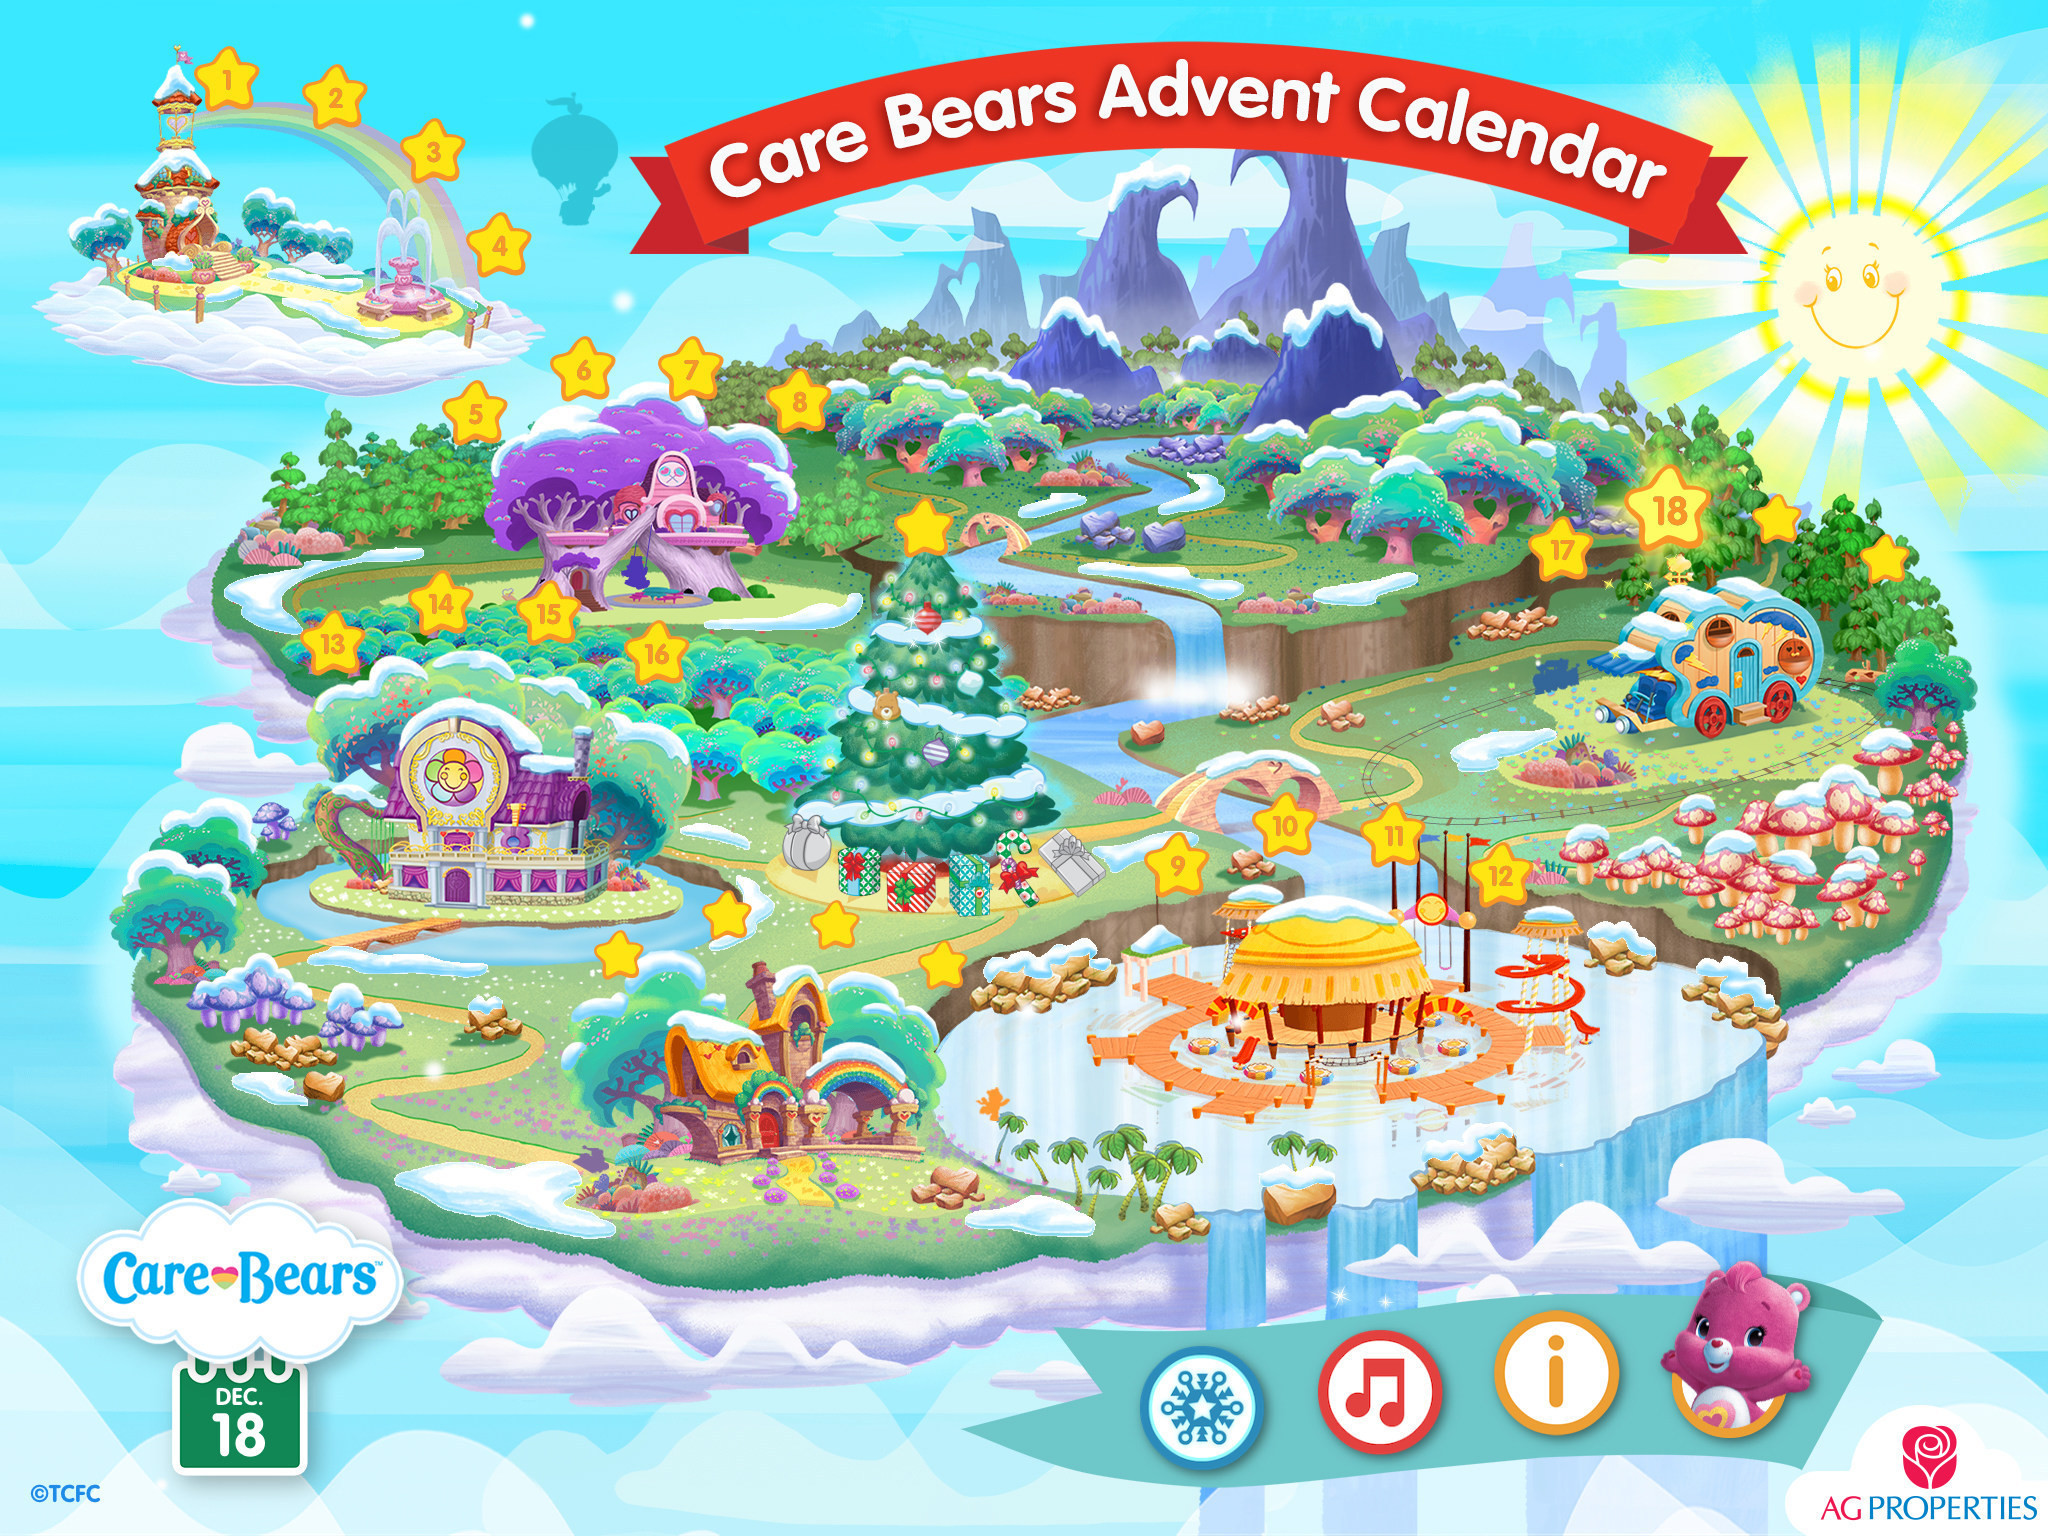 2048x1536 Count Down to Christmas with Brand-New Care Bears(TM) Advent Calendar!